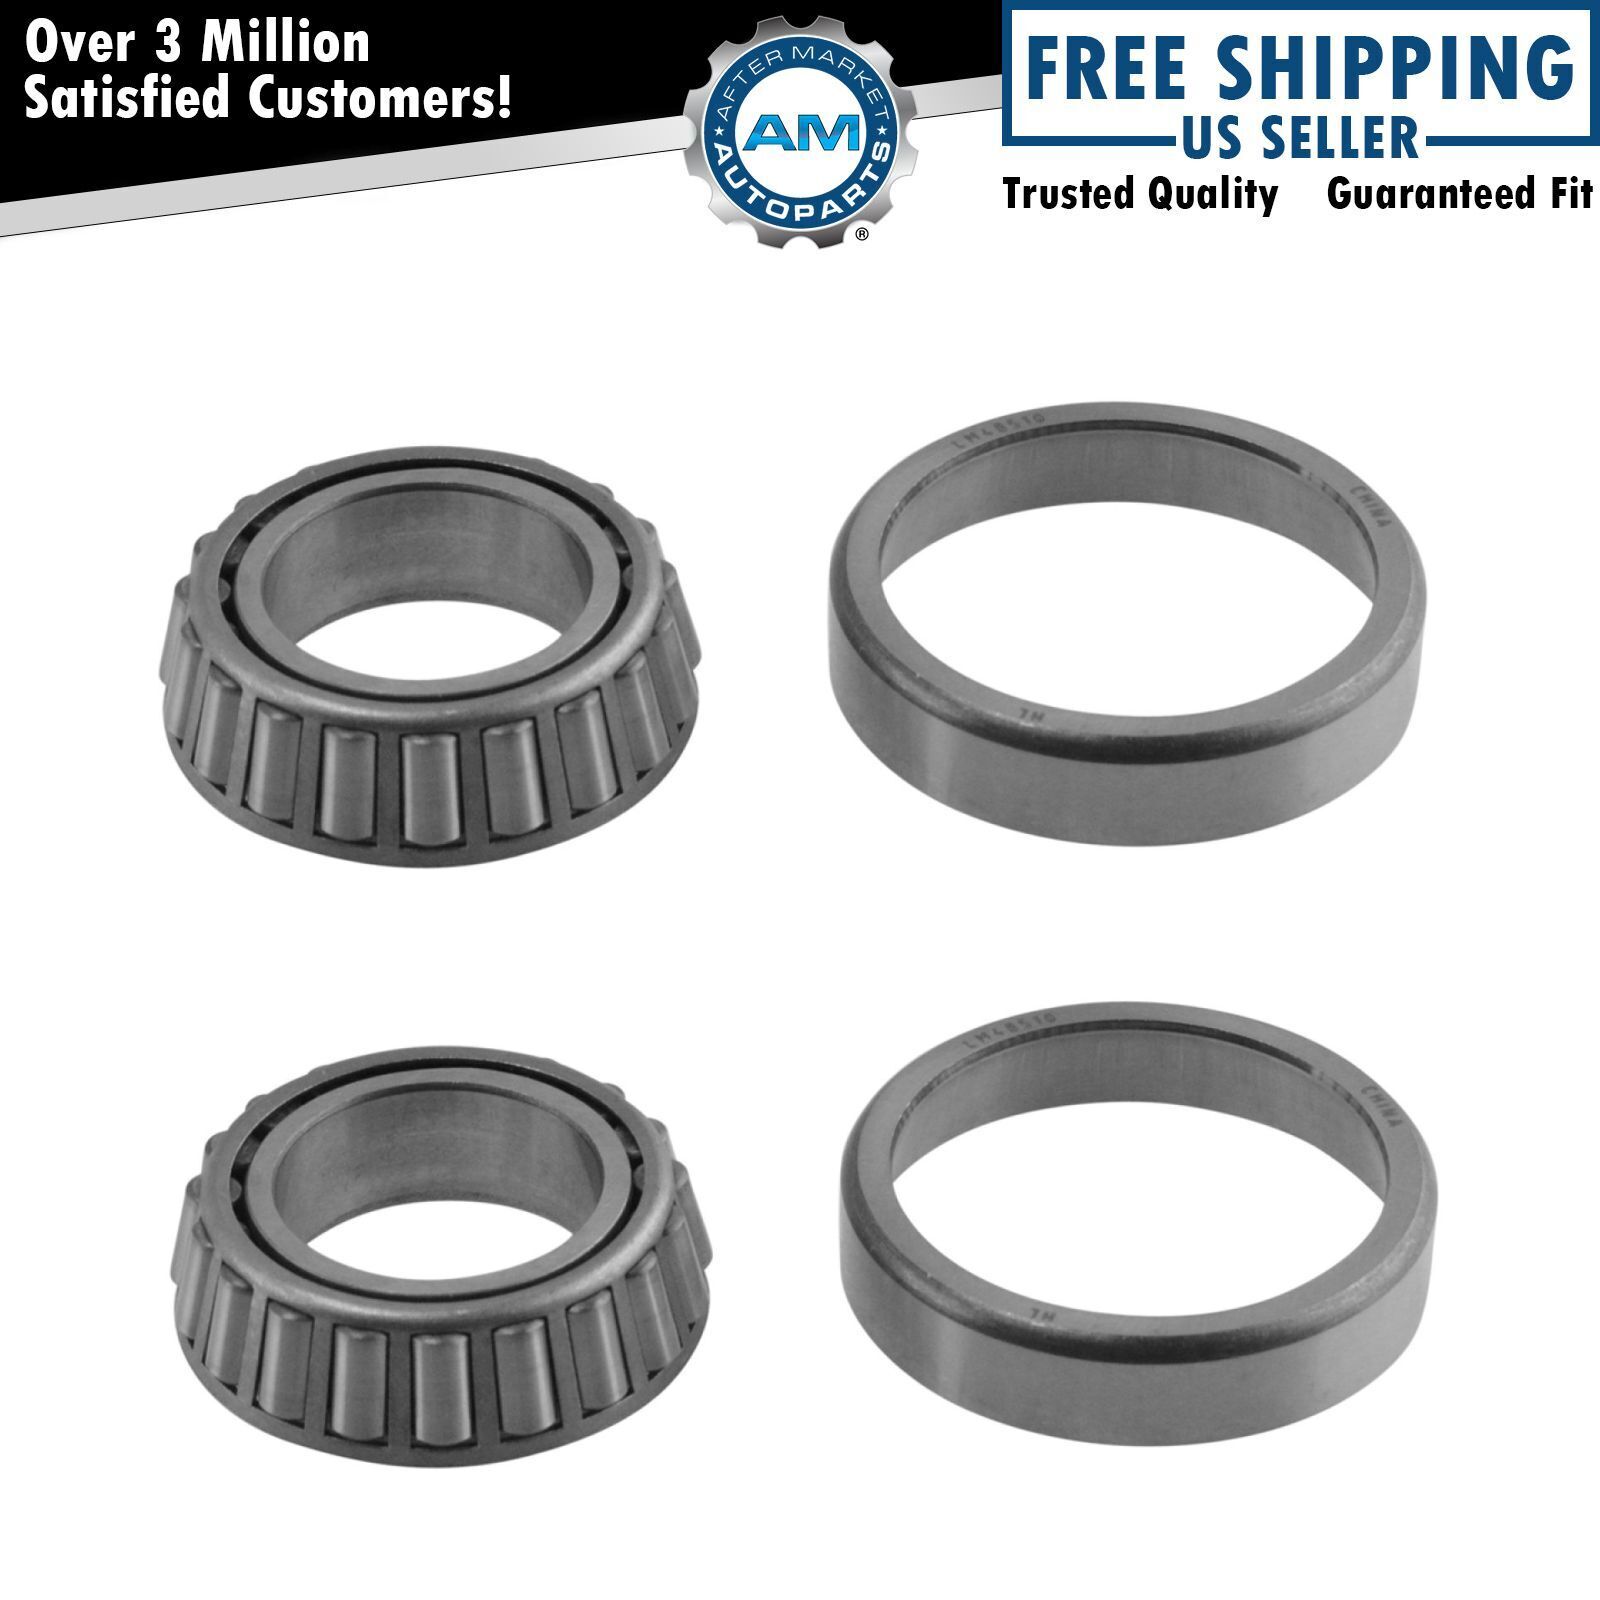 Wheel Bearing & Race Set Pair LH & RH Sides for Chevy GMC Ford Jeep Toyota